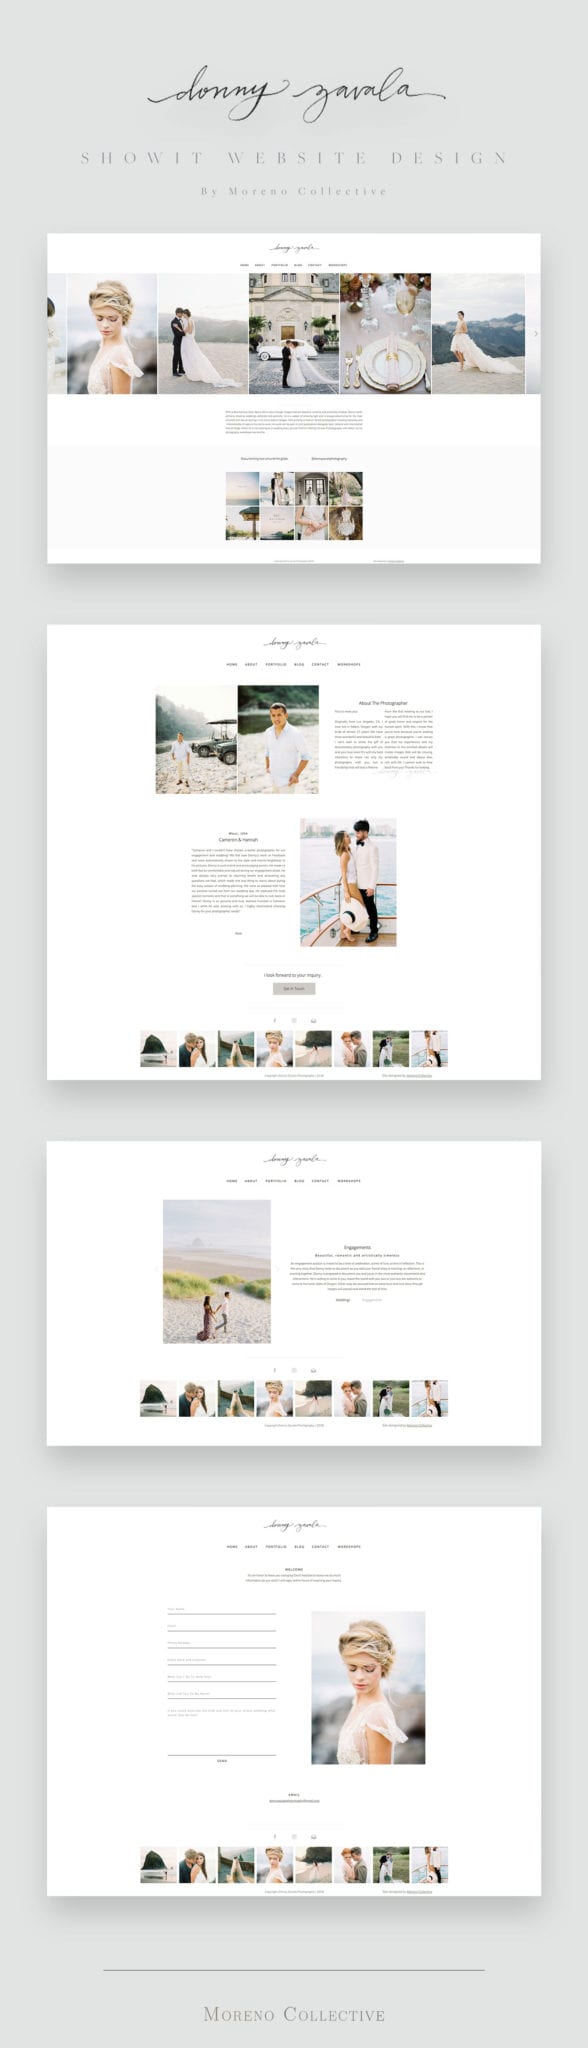 Showit Website Design for Donny Zavala Photography by Moreno Collective